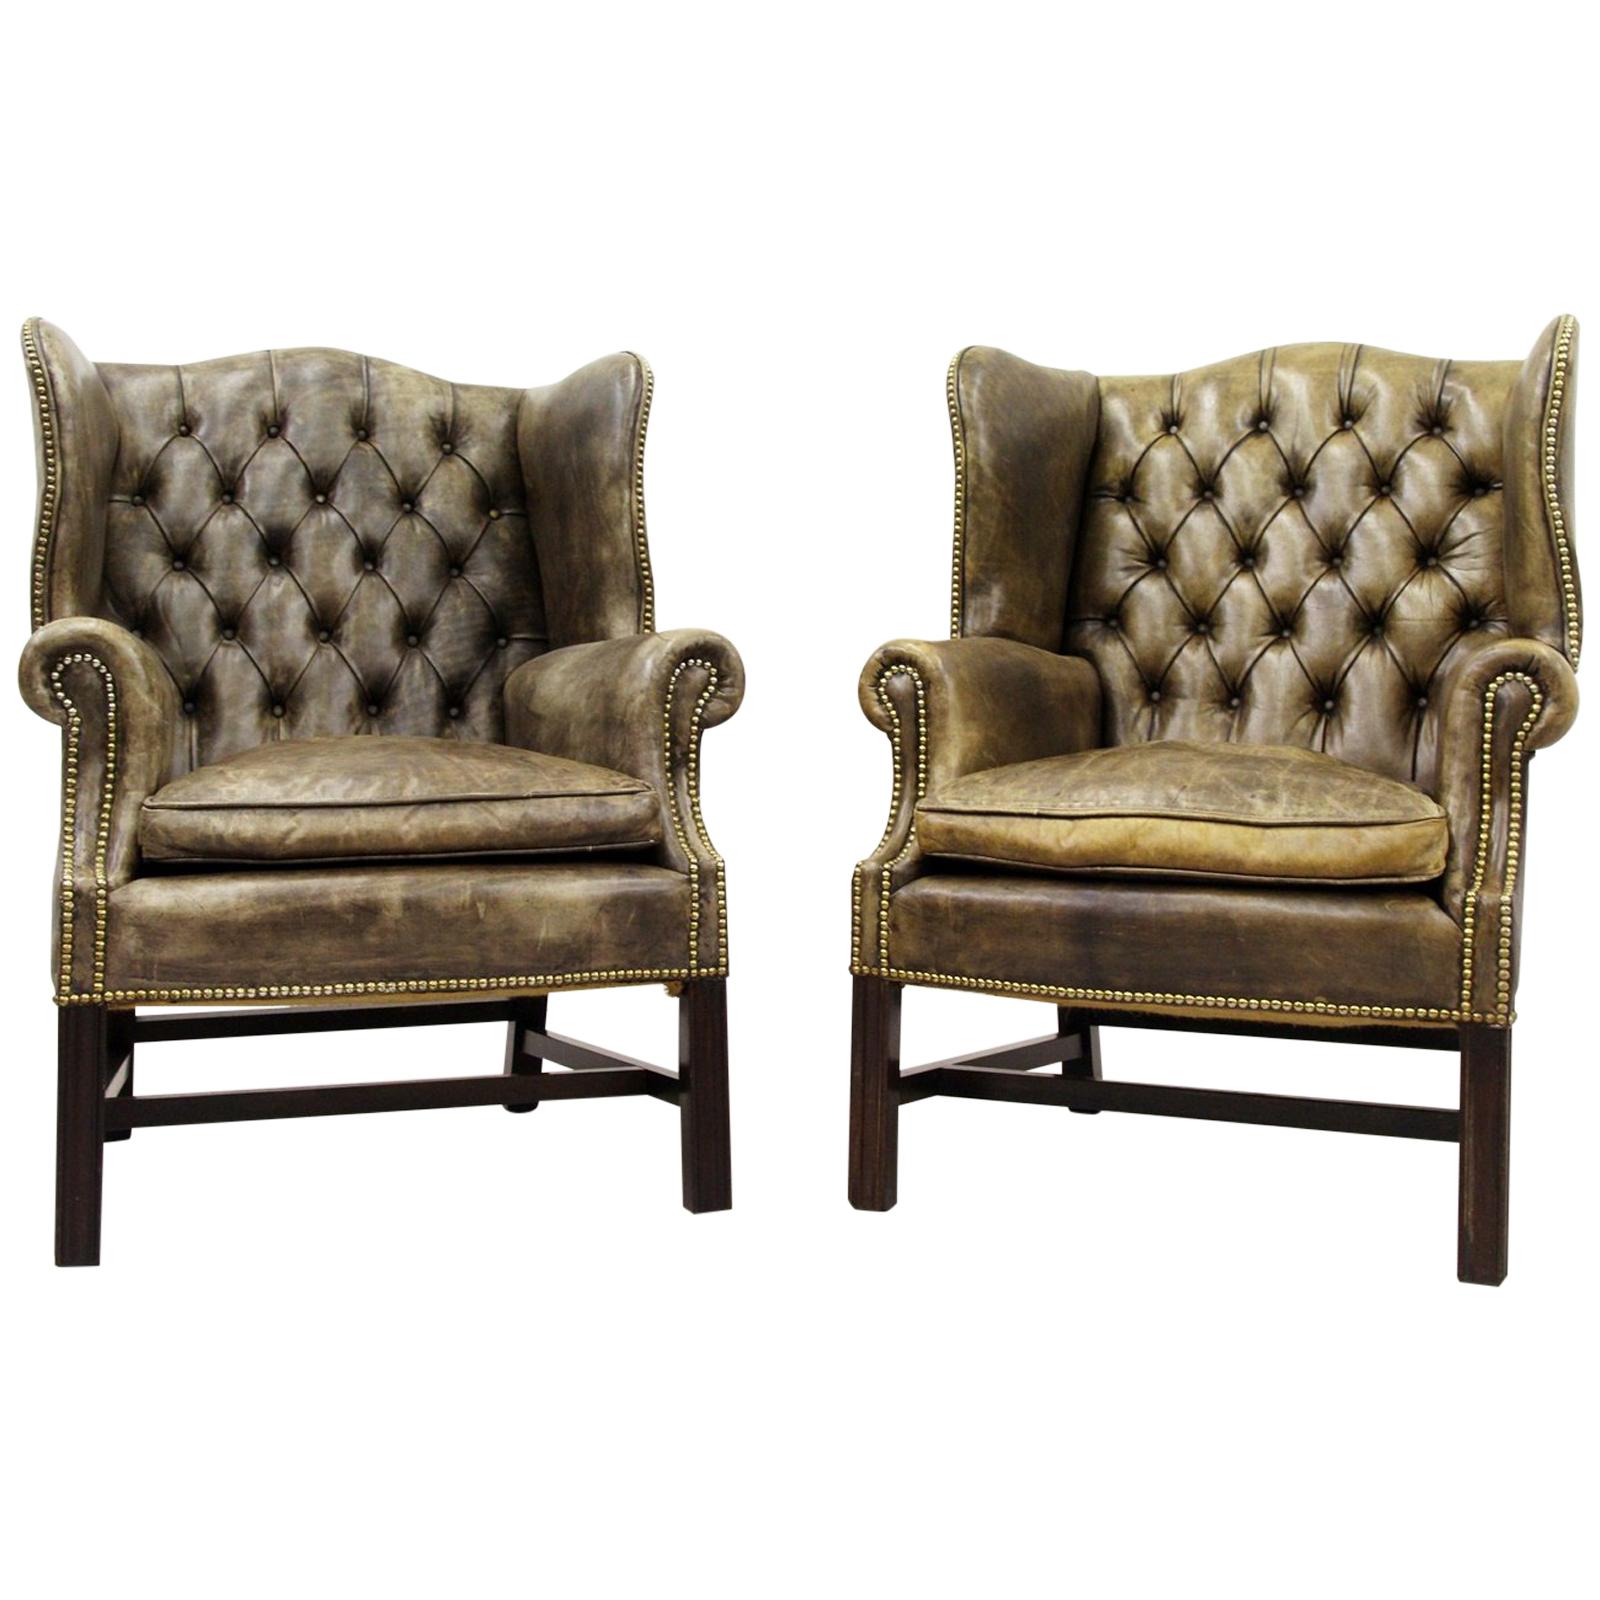 2 Chesterfield Armchair Wing Chair Antique Chair im Angebot